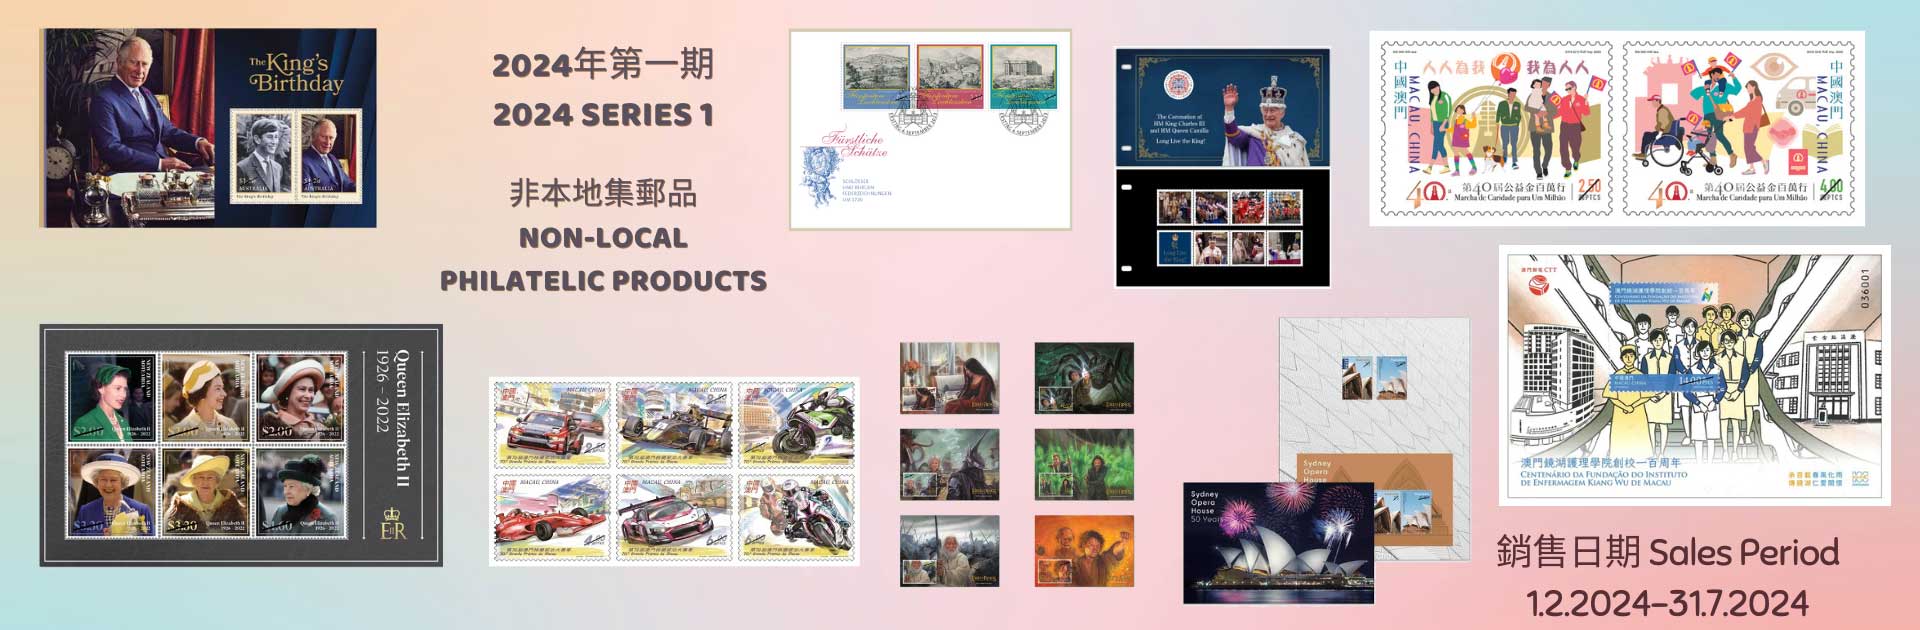 Sale of Non-local Philatelic Products